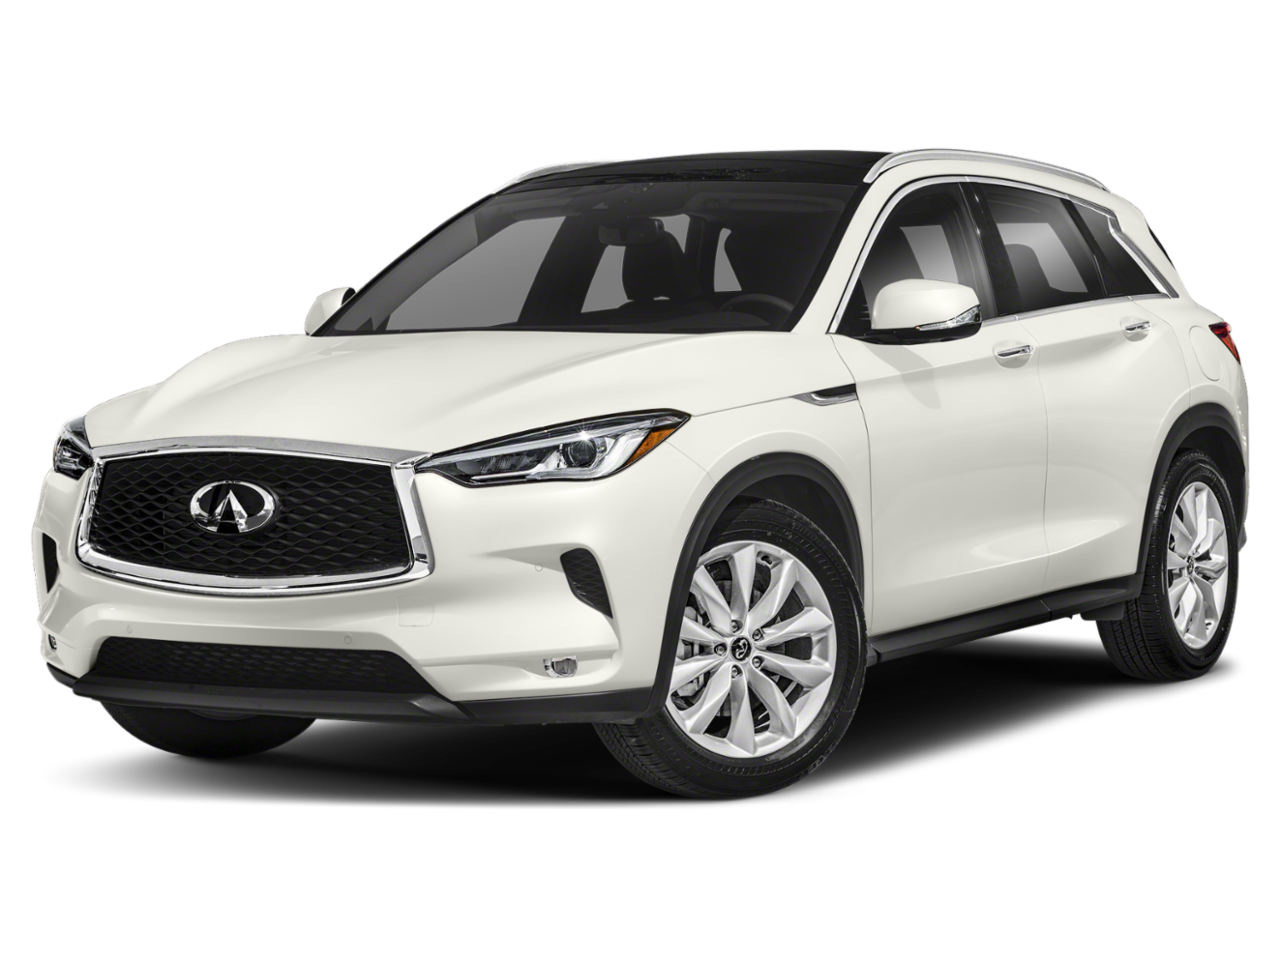 Bennett Infiniti Of Wilkes Barre In Plains Pa New And Used Dealer